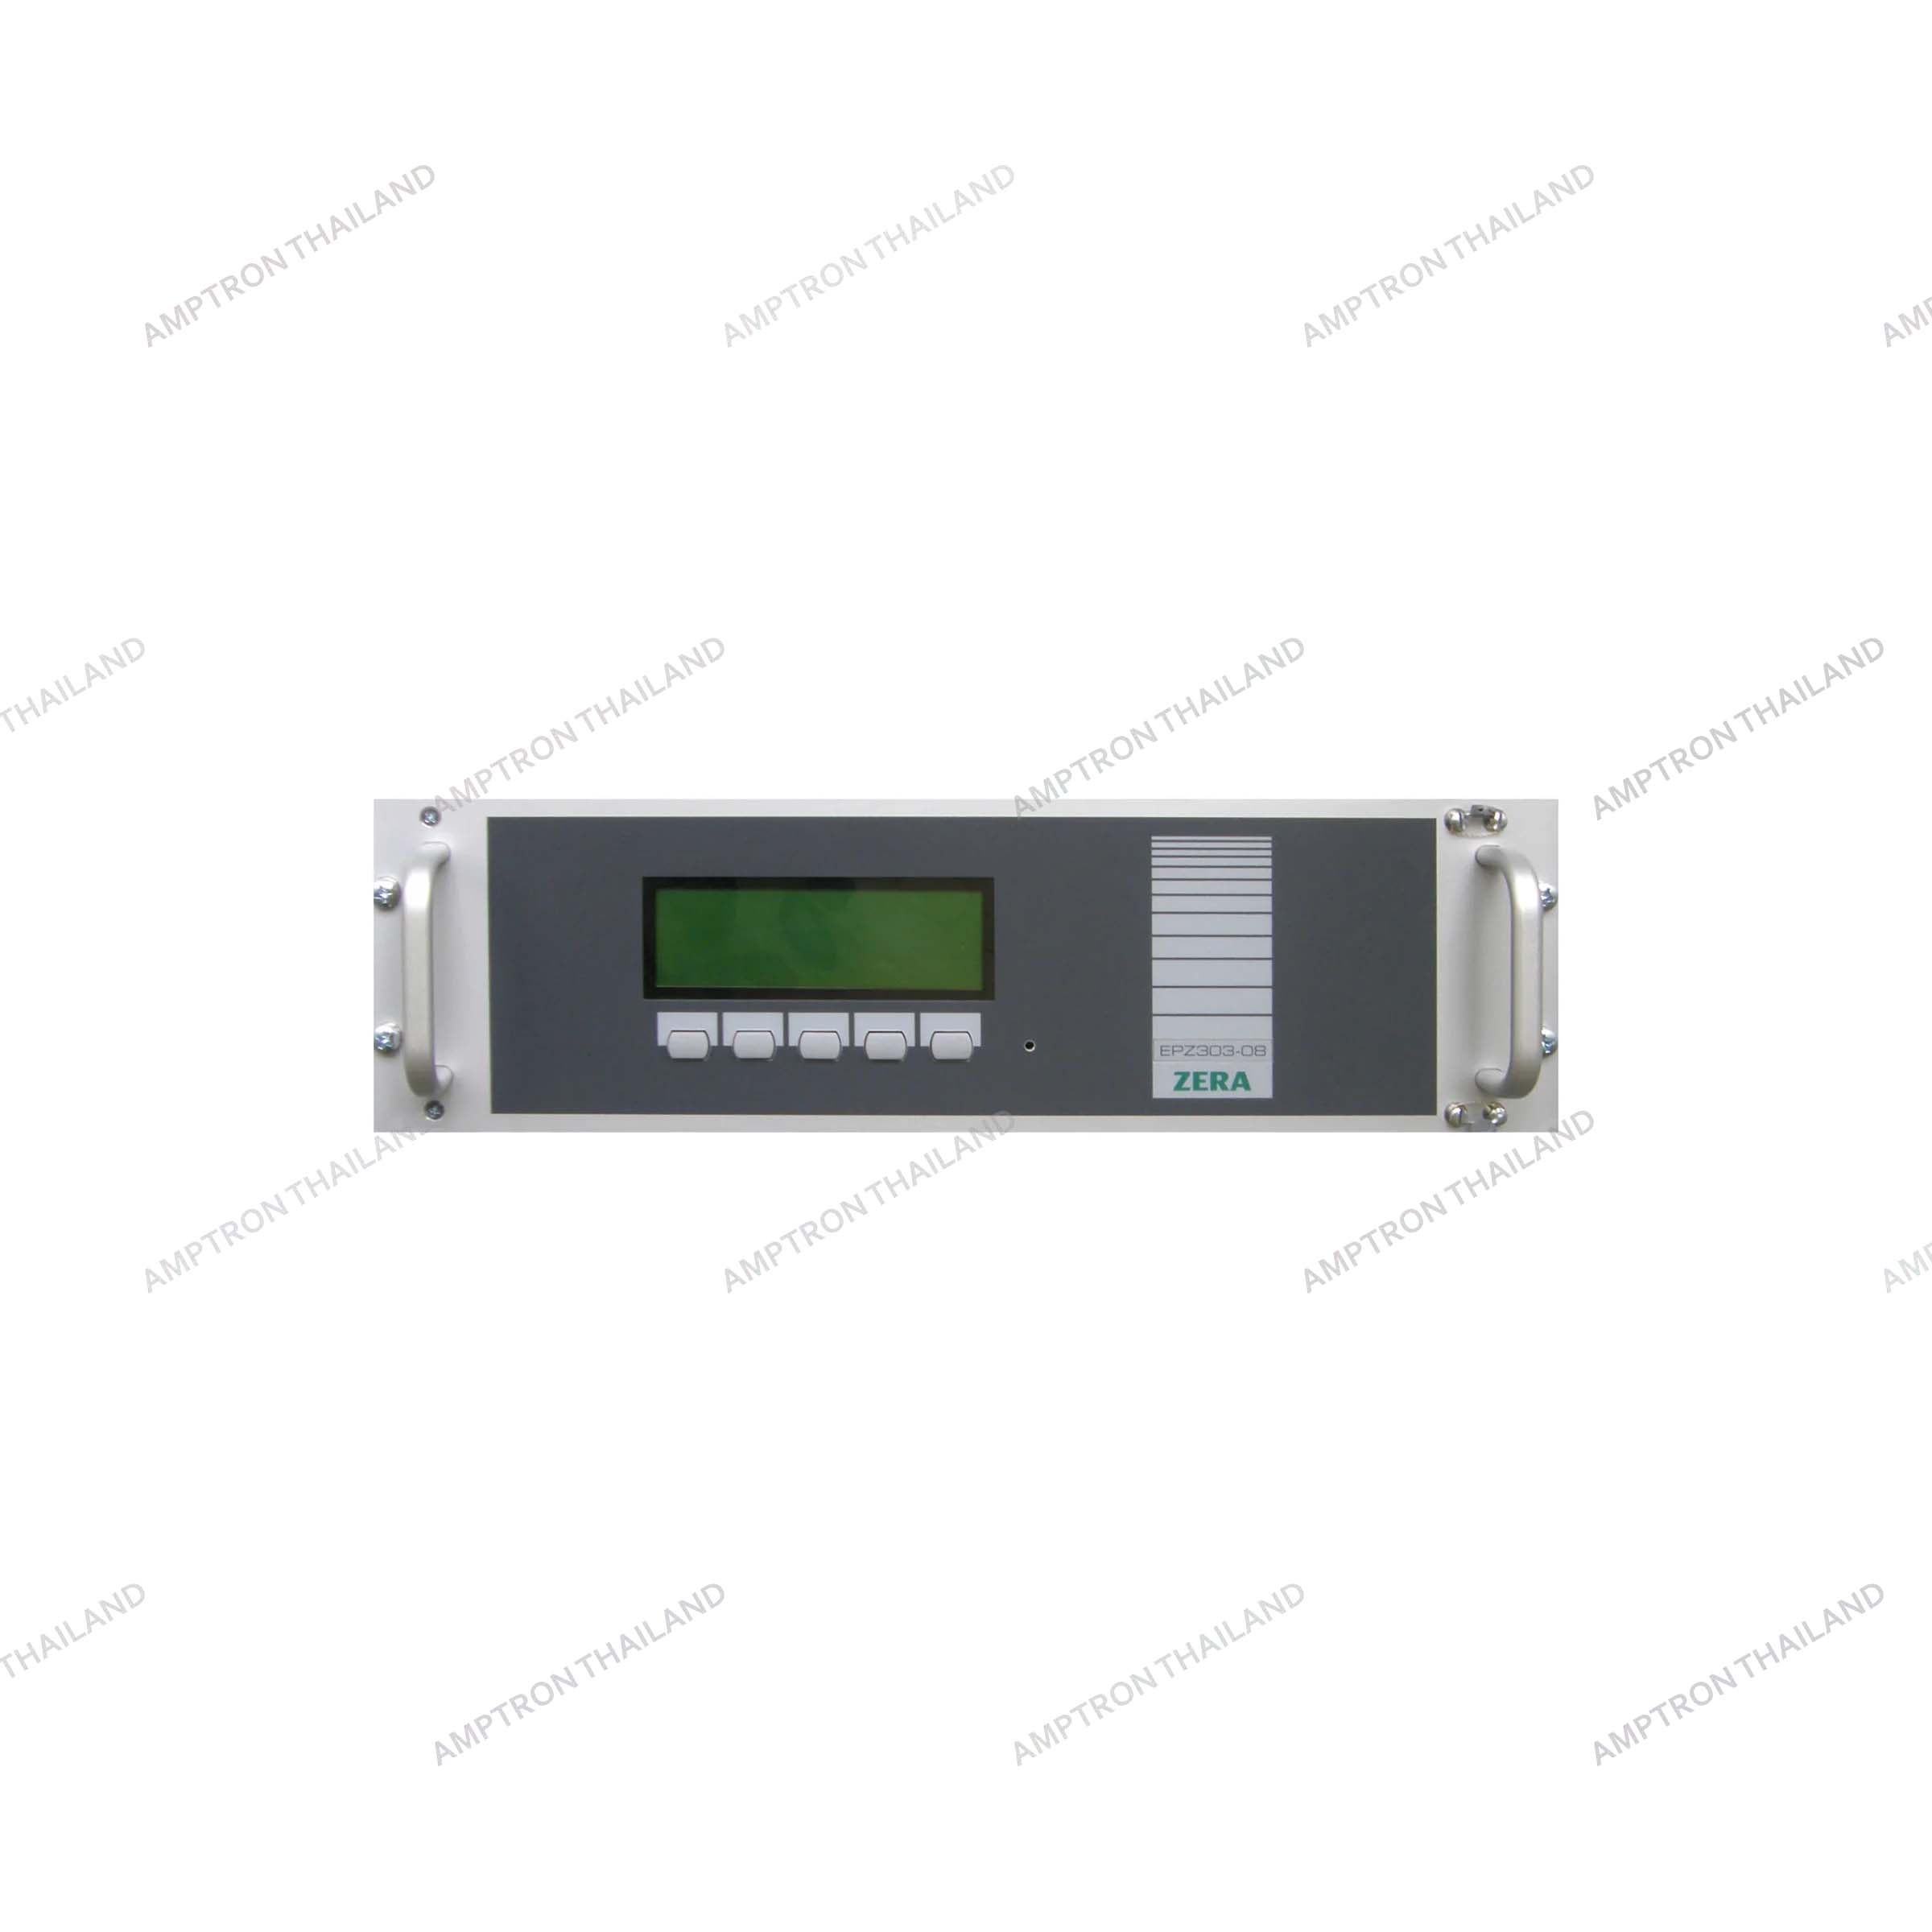 EPZ303 Electronic Reference Meter